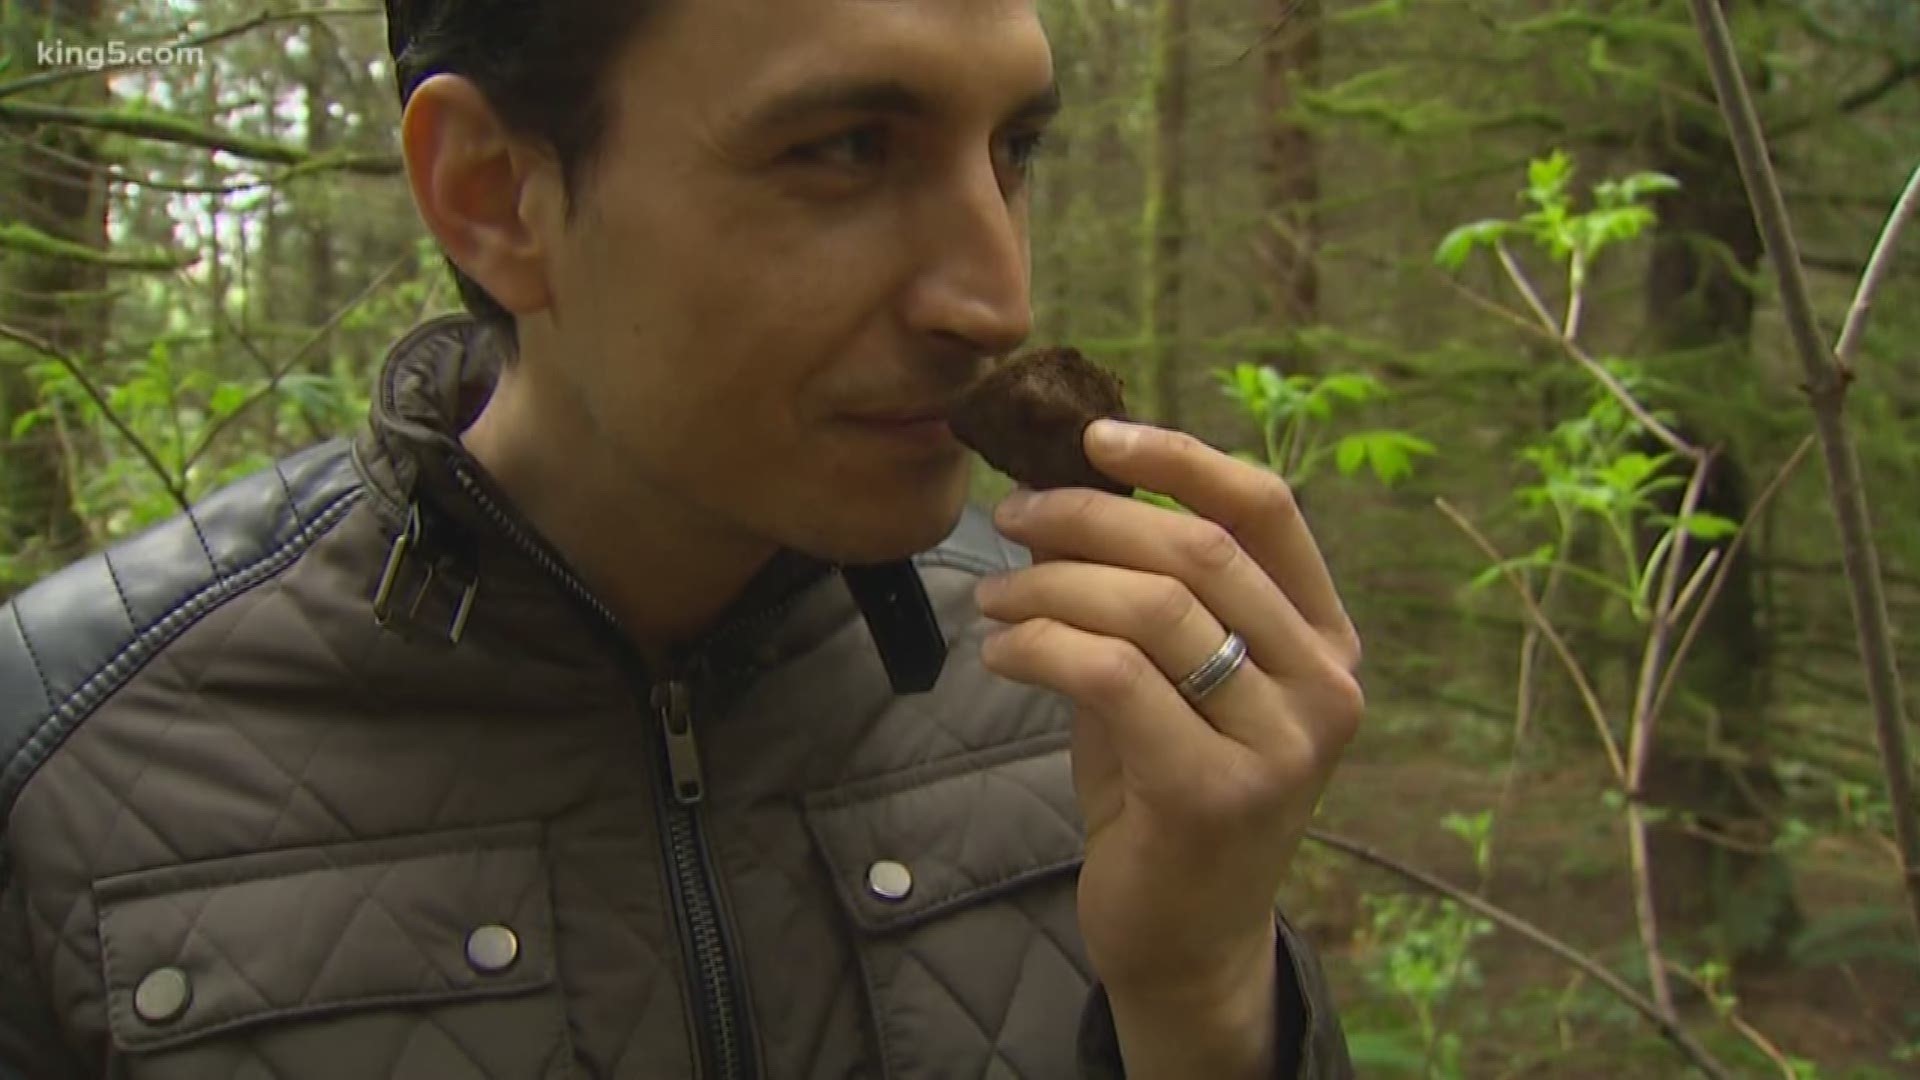 KING 5's Jordan Steele goes truffle hunting for the first time. Until this day, he had no idea how desired and how much money people spend on this fungai.